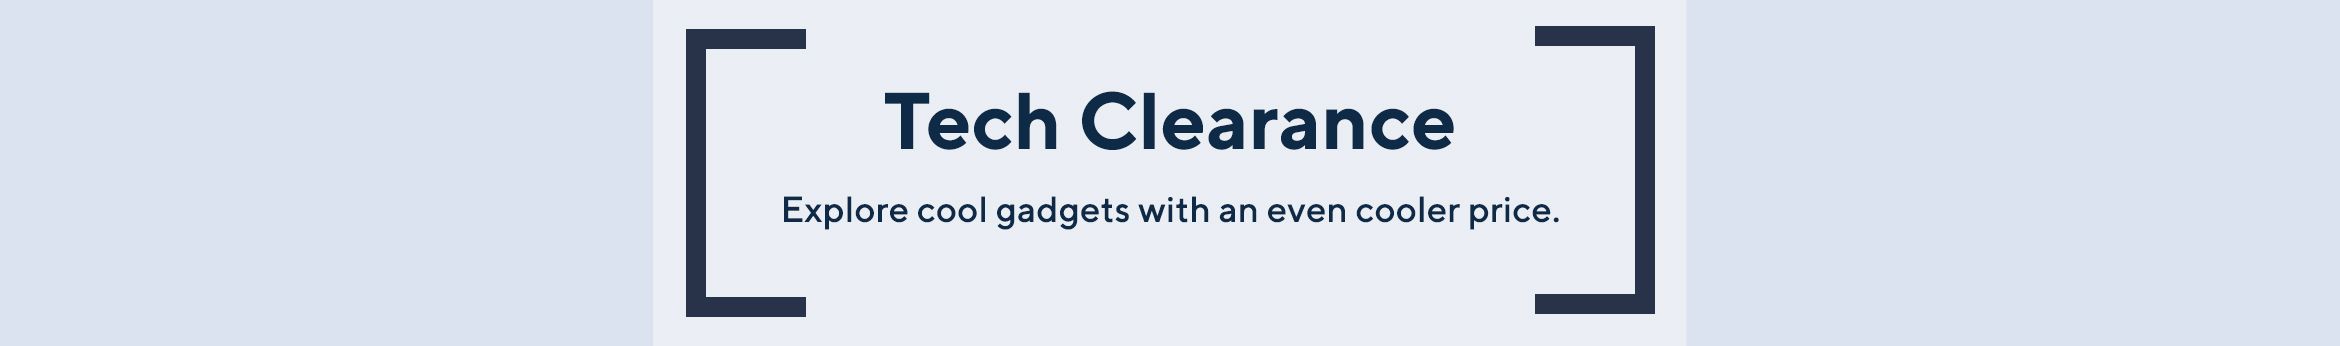 Tech Clearance - Explore cool gadgets with an even cooler price.